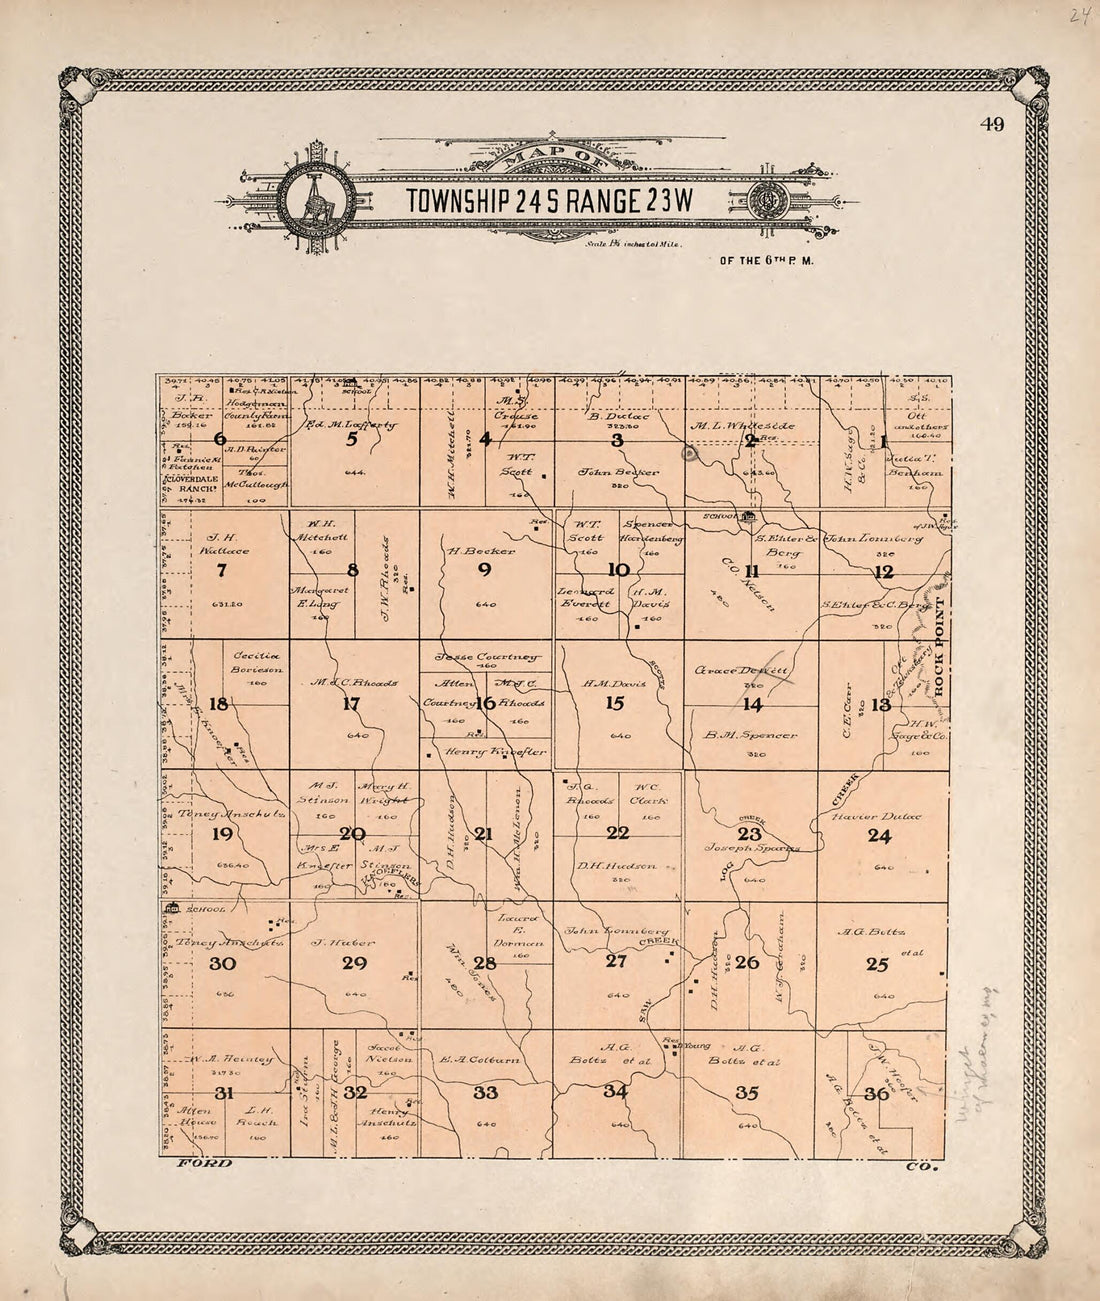 This old map of Map of Township 24 S Range 23 W from Standard Atlas of Hodgeman County, Kansas from 1907 was created by  Geo. A. Ogle &amp; Co in 1907